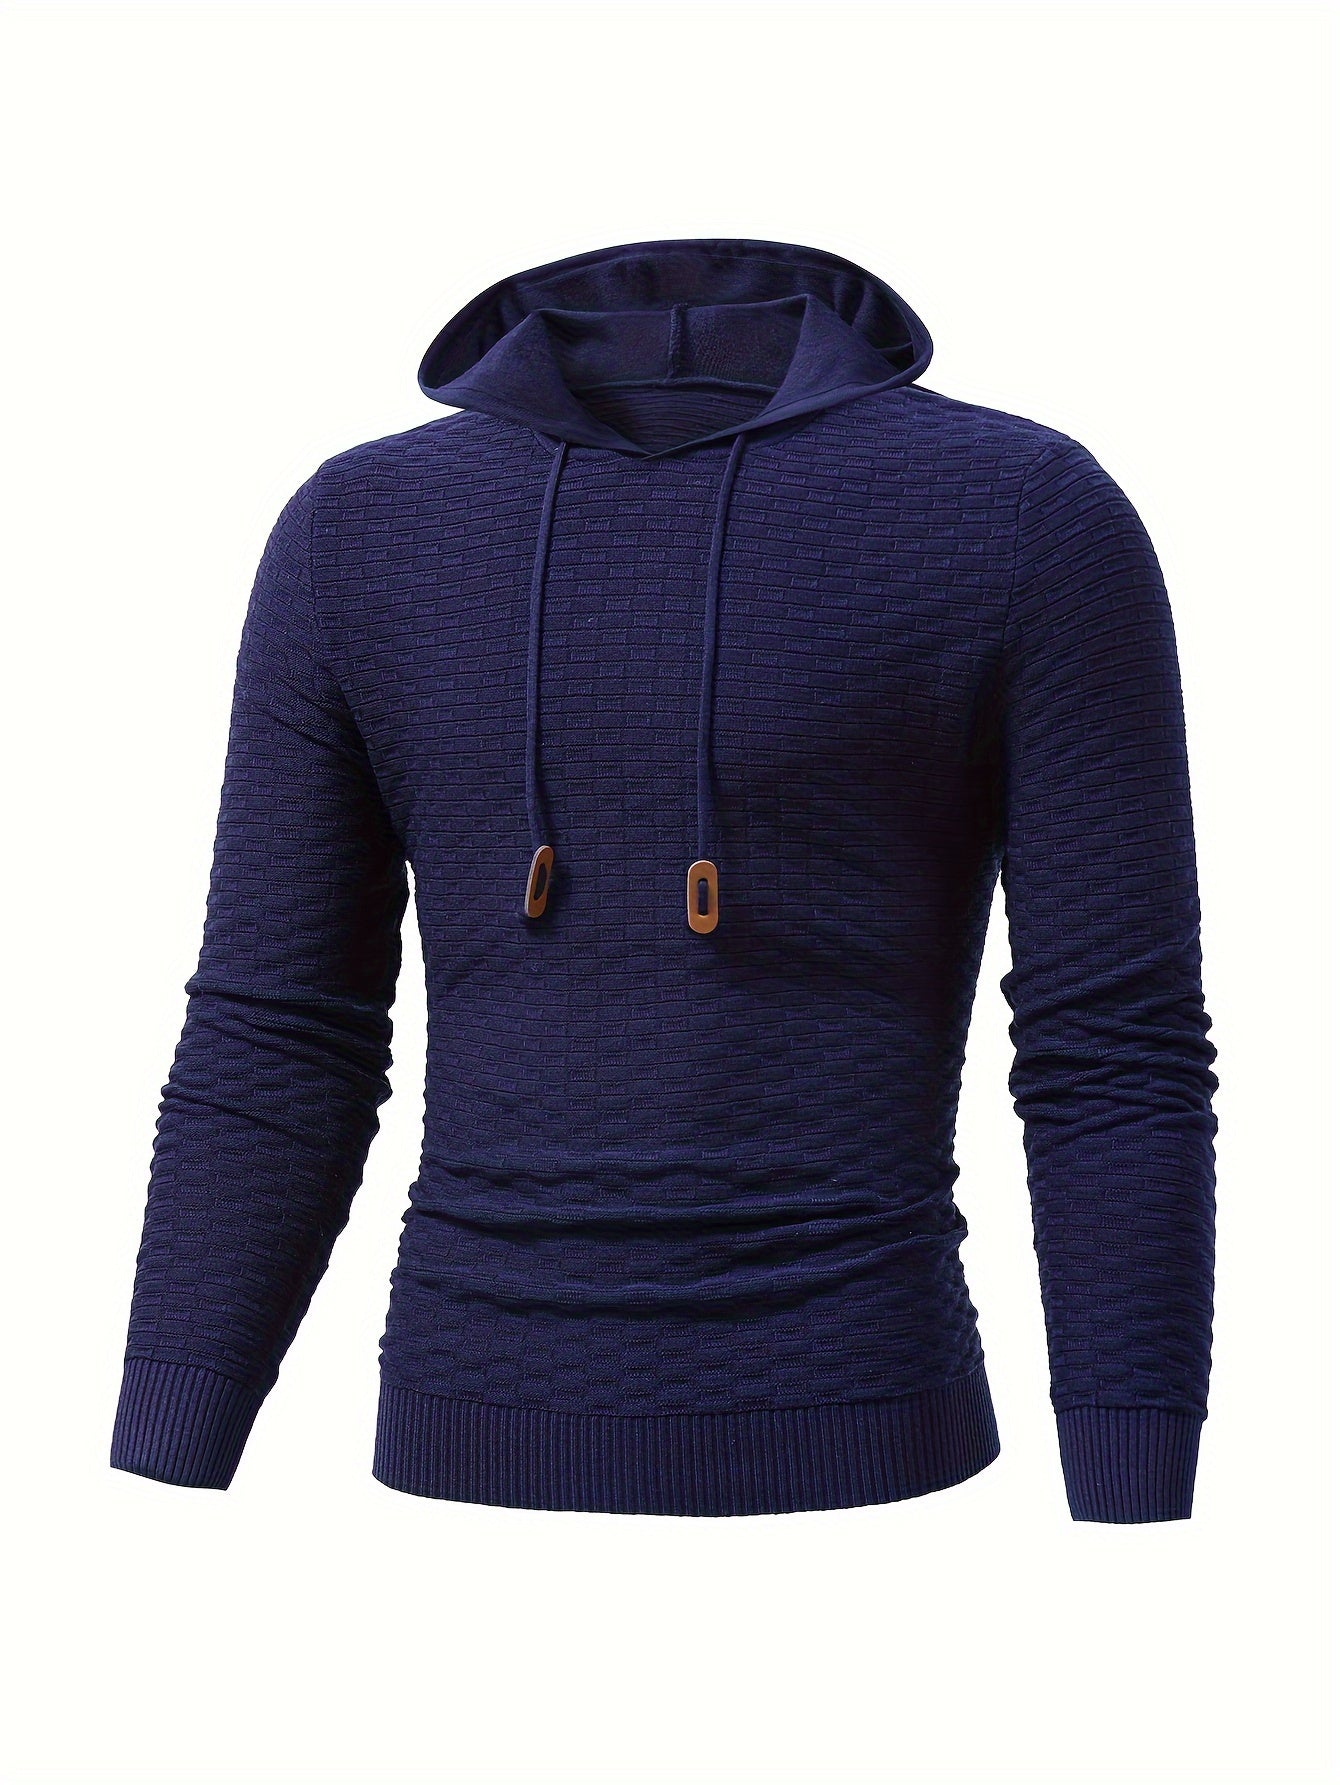 Foruwish - Men's Casual Drawstring Long Sleeves Hooded Pullover Sweaters